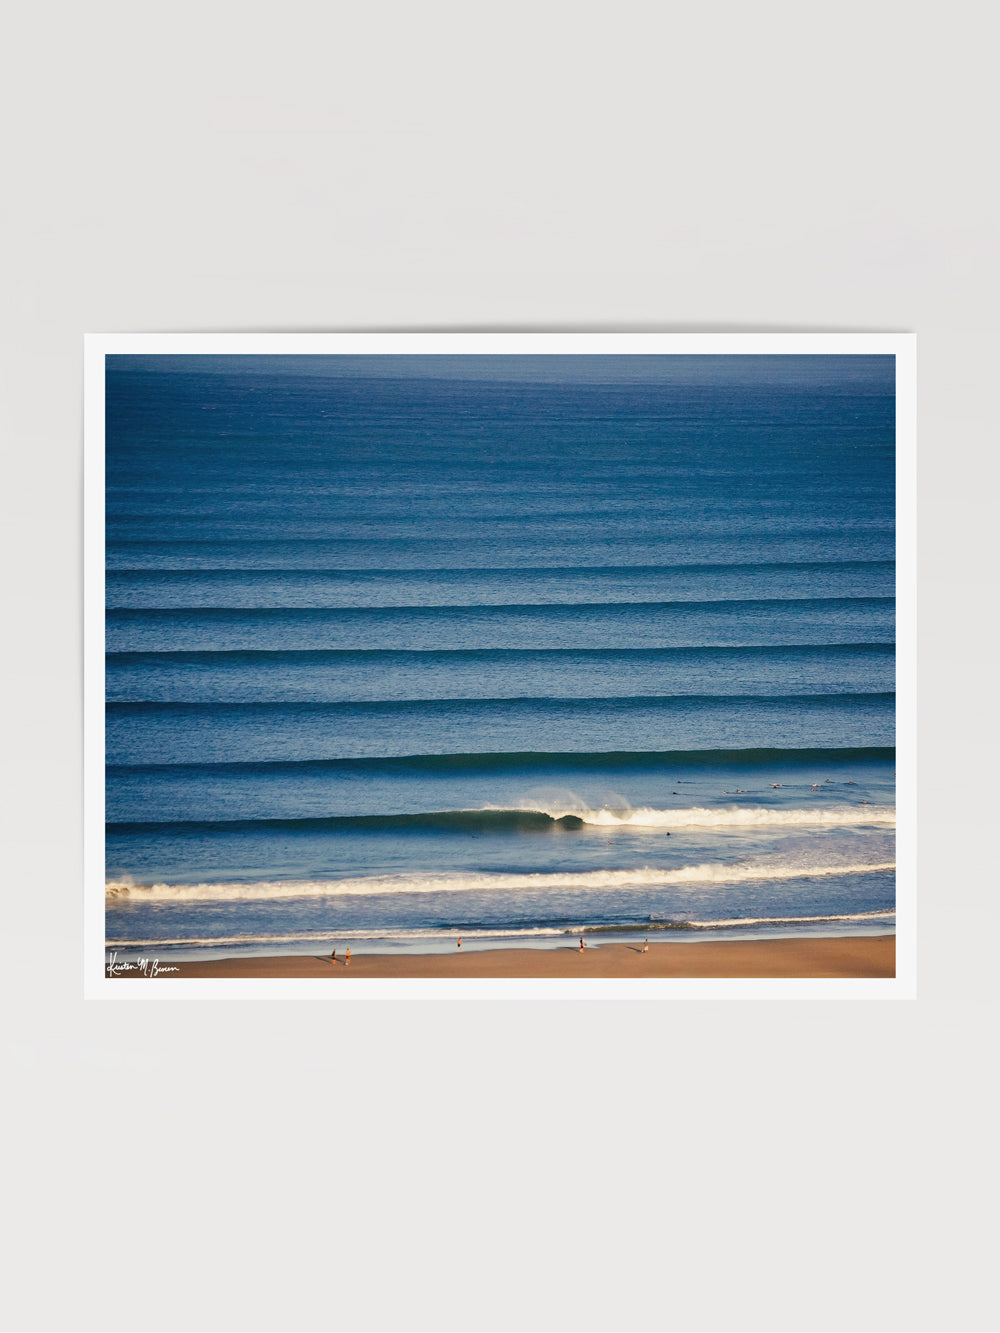 Corduroy wave lines in Tamarindo, Costa Rica. Liquid Dreams print by Samba to the Sea at The Sunset Shop.